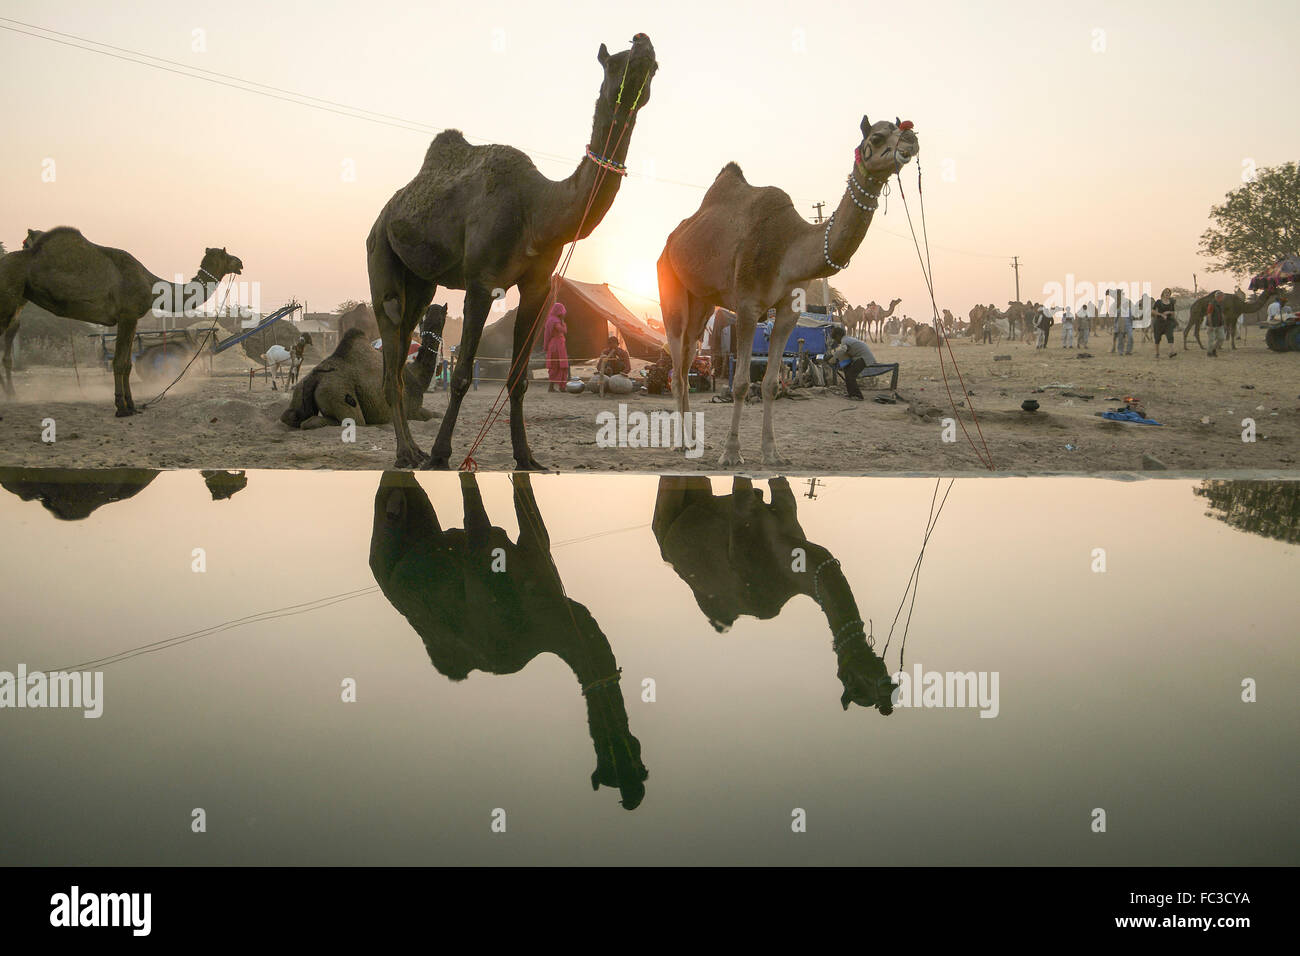 Camel herds or camel trader bring camels during sunset to the watering pool. Stock Photo